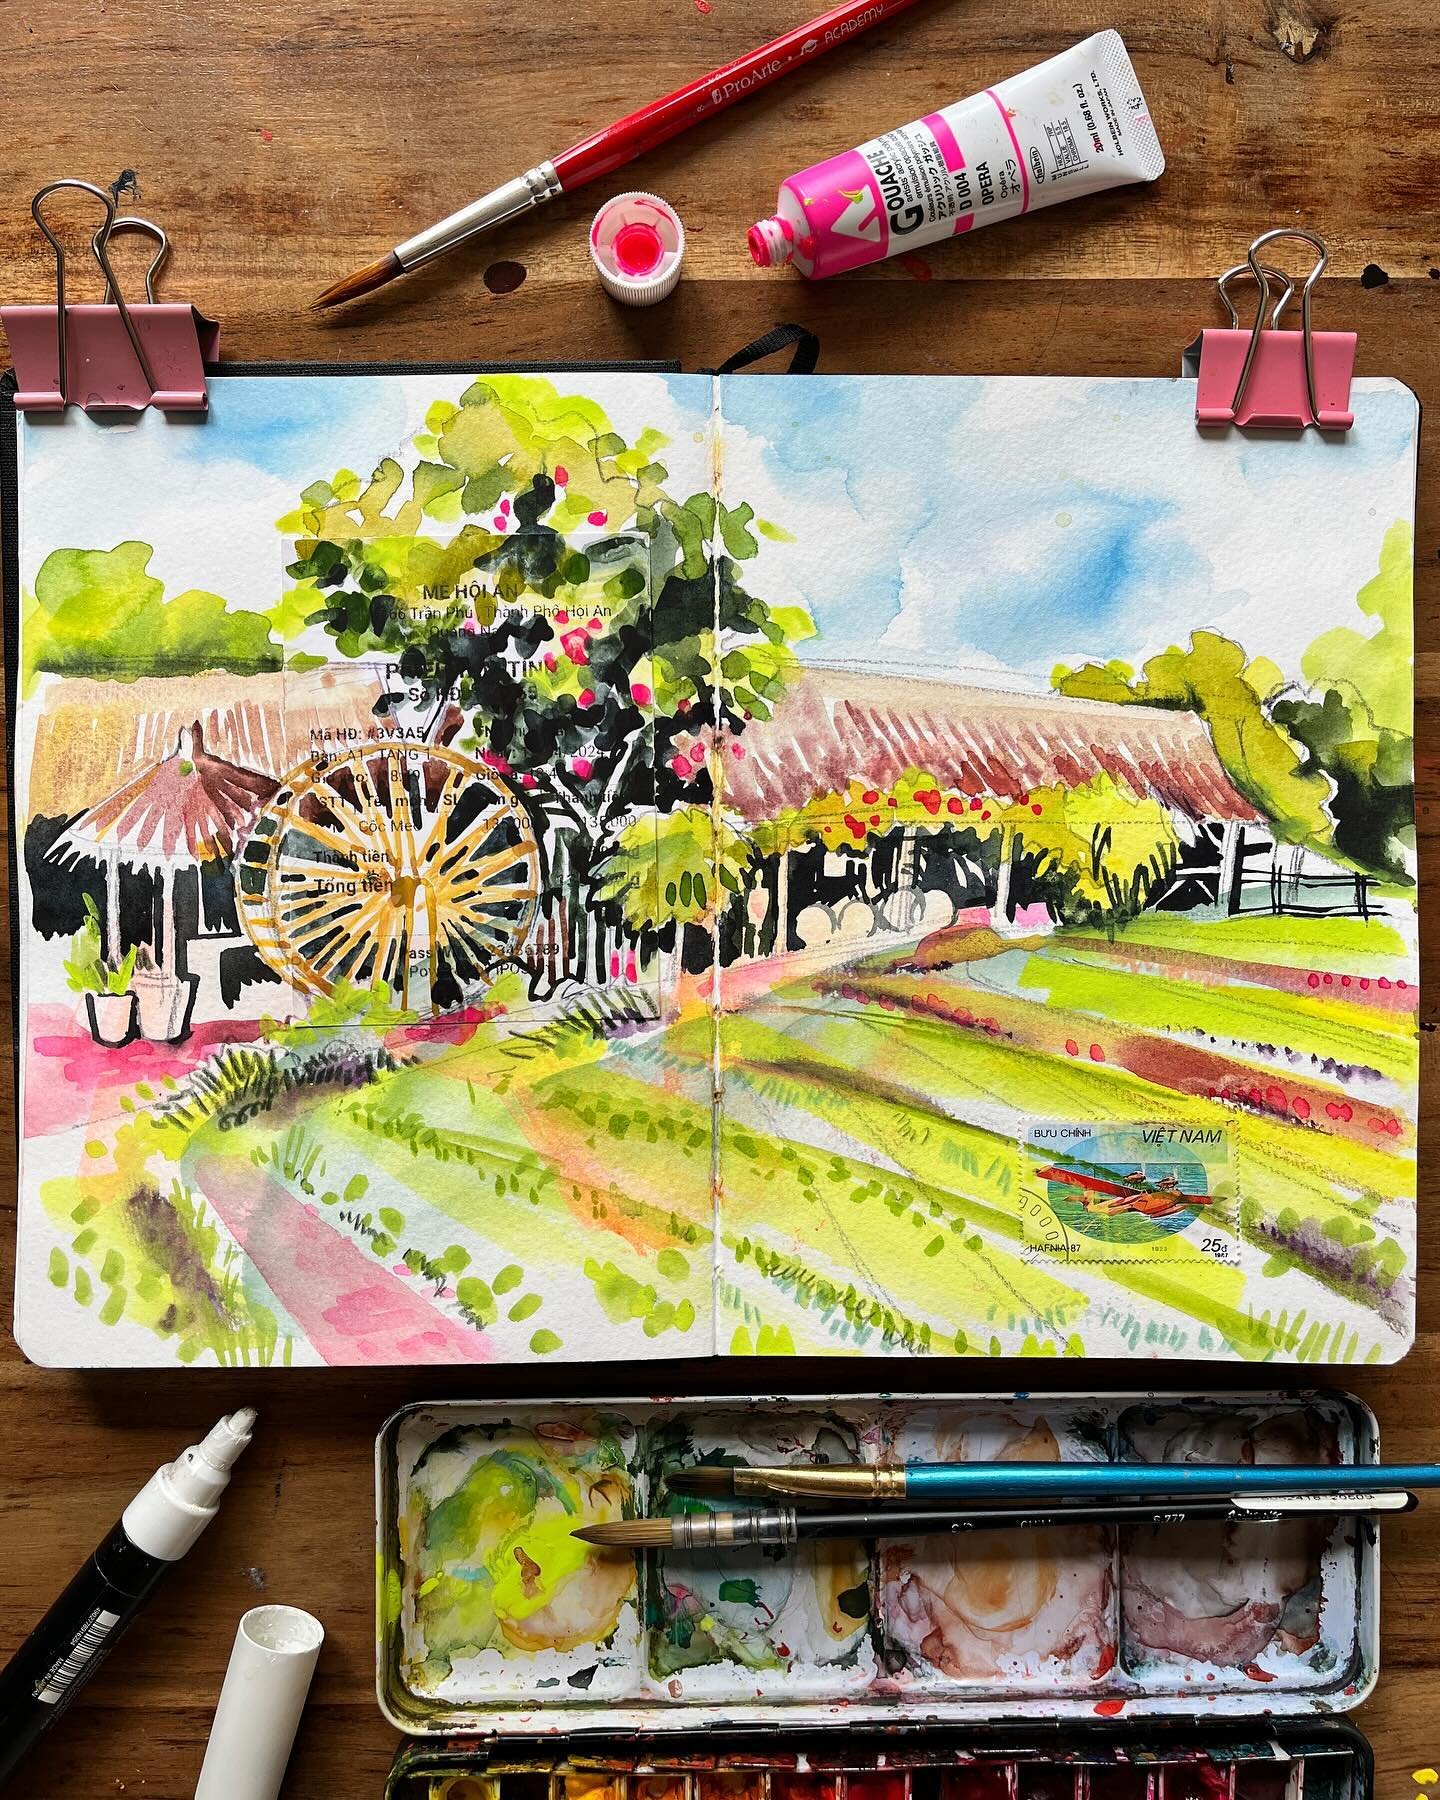 🇻🇳A few more pages from my Vietnam sketchbook where I HAD to use @holbein_art vivid leaf green and opera acryla gouache to capture the vibrancy of the scenes when immersed in @annasartfoodculture retreat. 
.
.
🌿These are from our trips to the Tra 